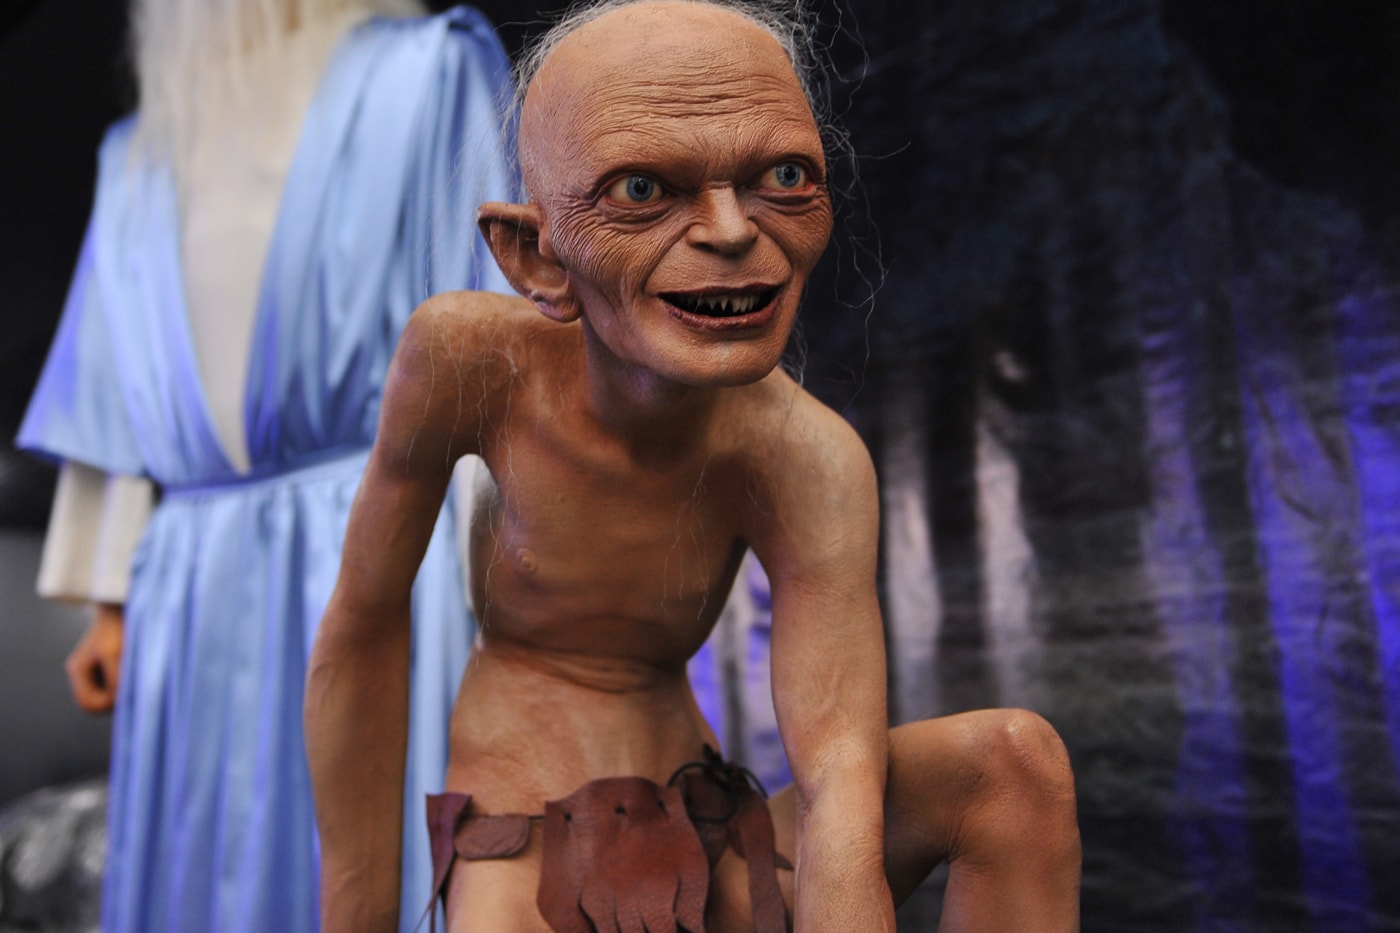 The Lord of the Rings: Gollum offers an authentic take on Tolkien's  Middle-earth